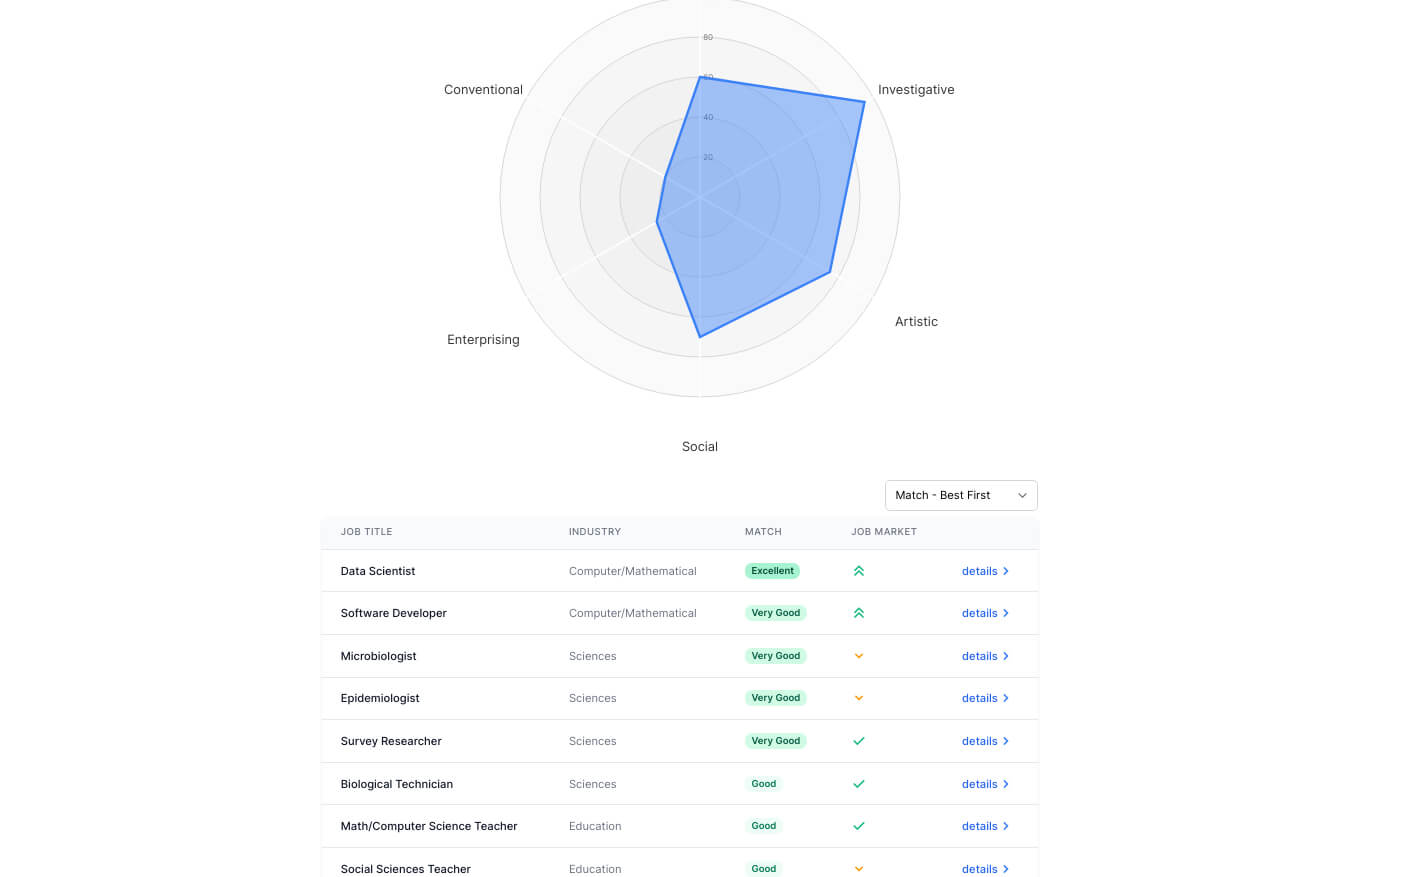 While the DiSC profile assessment is aimed at improving your performance at your current job, TraitLab helps you step back and see how your personality compares to many different career options.